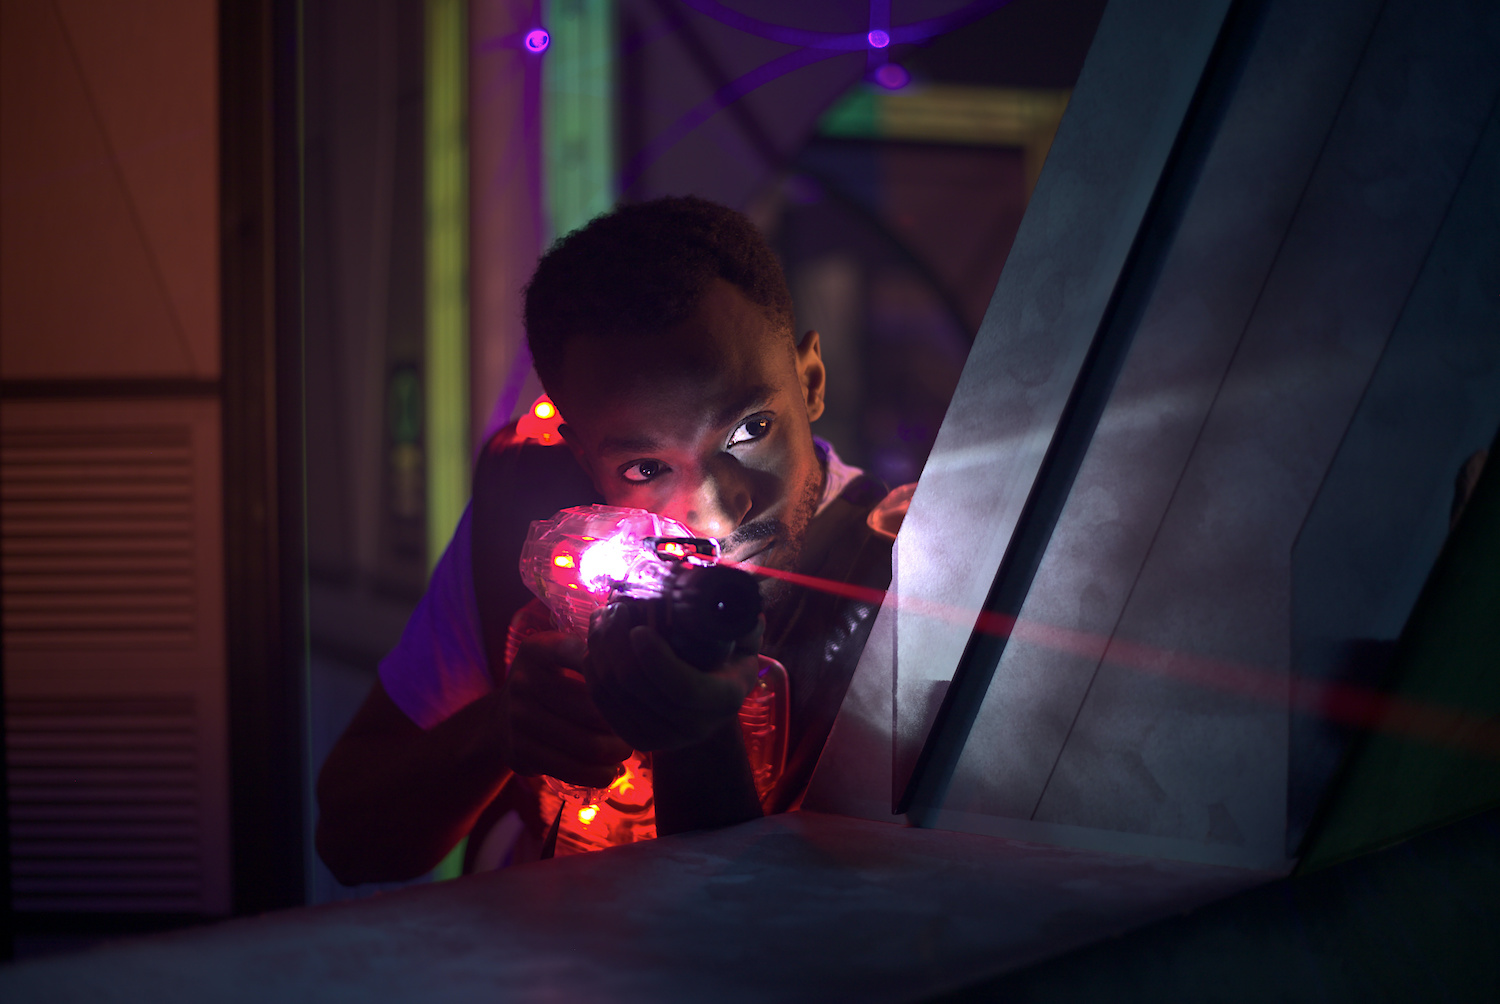 Skills for securing a win in your next laser tag challenge